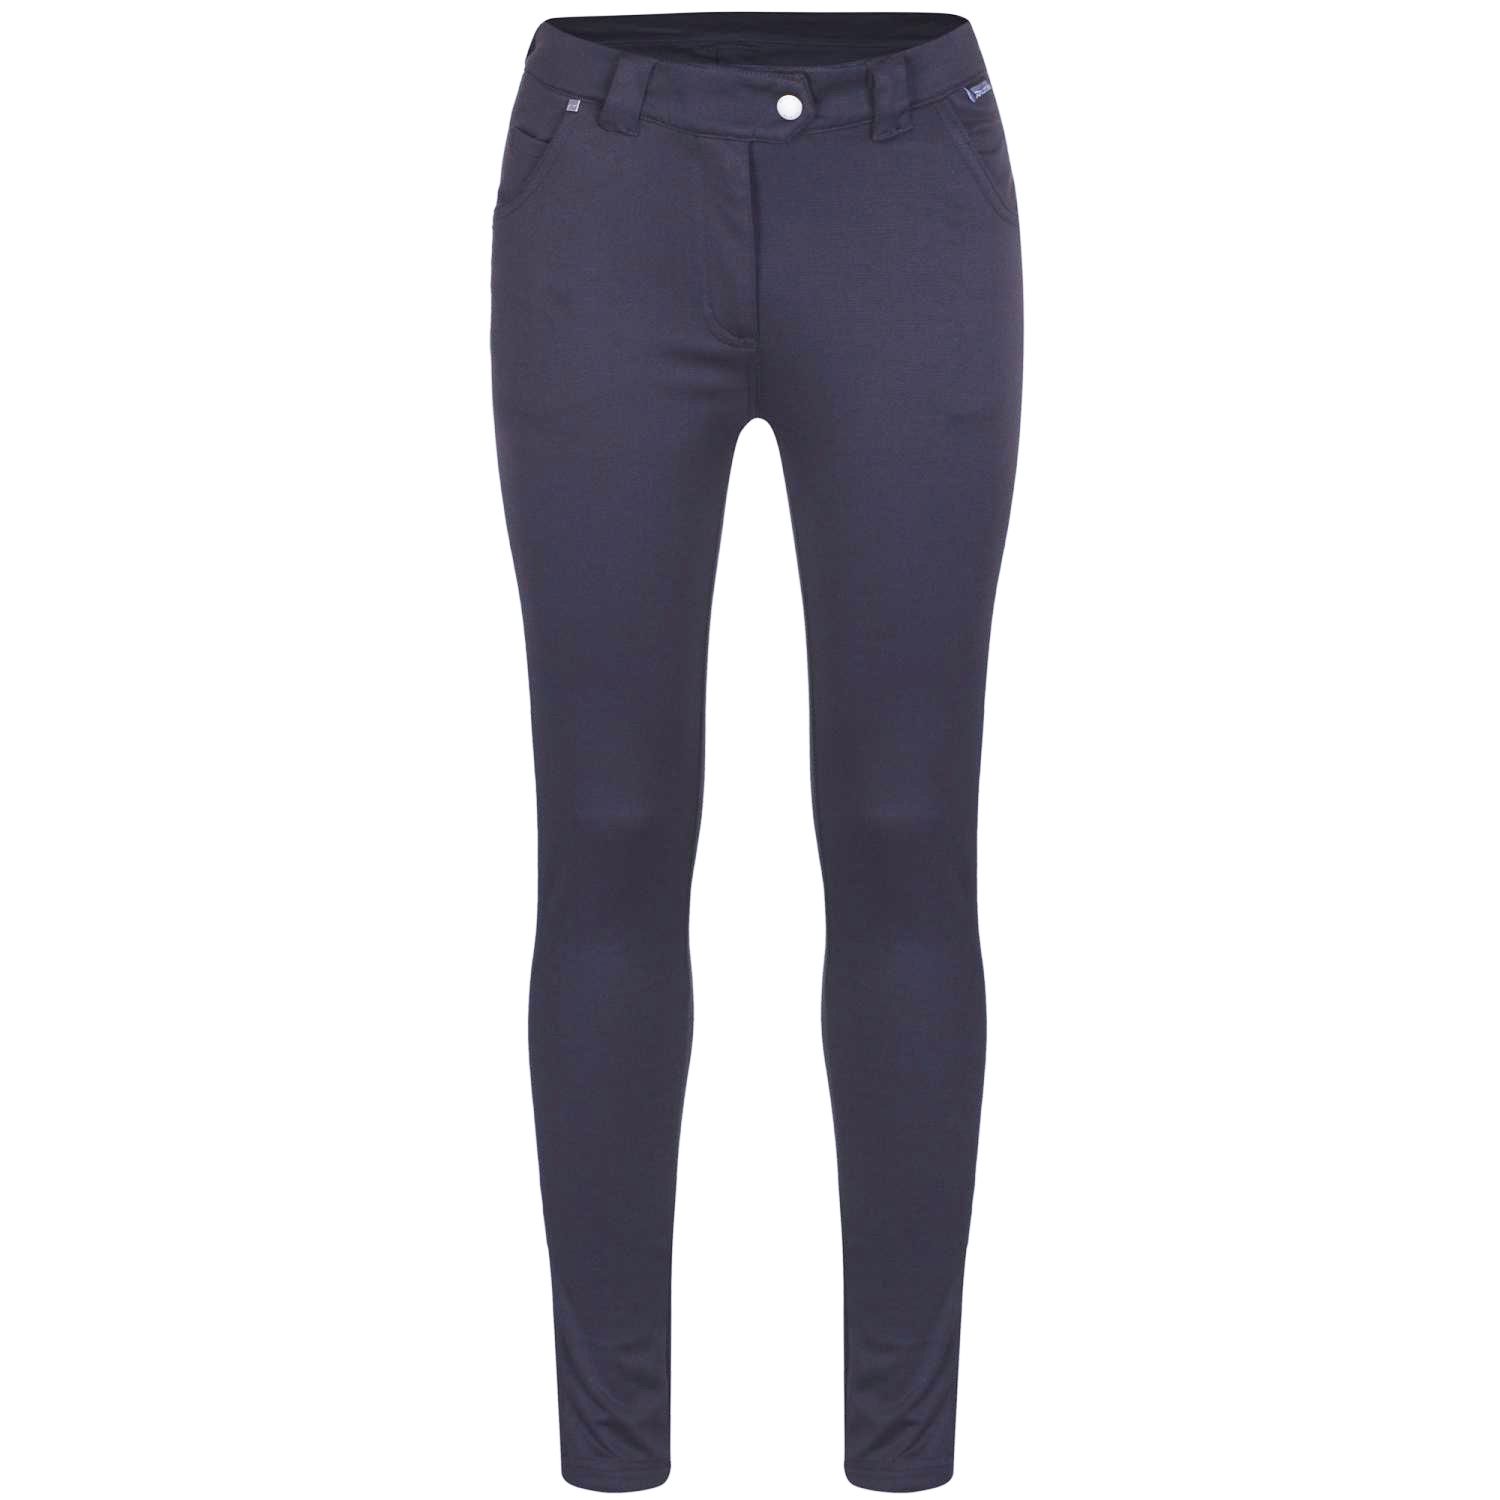 Womens leggings. Mock front pockets. 2 back pockets. Stretchy. Fabric: 75% Polyester, 20% Viscose, 5% Rayon. Regatta Womens sizing (waist approx): 6 (23in/58cm), 8 (25in/63cm), 10 (27in/68cm), 12 (29in/74cm), 14 (31in/79cm), 16 (33in/84cm), 18 (36in/91cm), 20 (38in/96cm), 22 (41in/104cm), 24 (43in/109cm), 26 (45in/114cm), 28 (47in/119cm), 30 (49in/124cm), 32 (51in/129cm), 34 (53in/135cm), 36 (55in/140cm). Leg length (ins): Short- 29, Regular- 31, Long- 33.